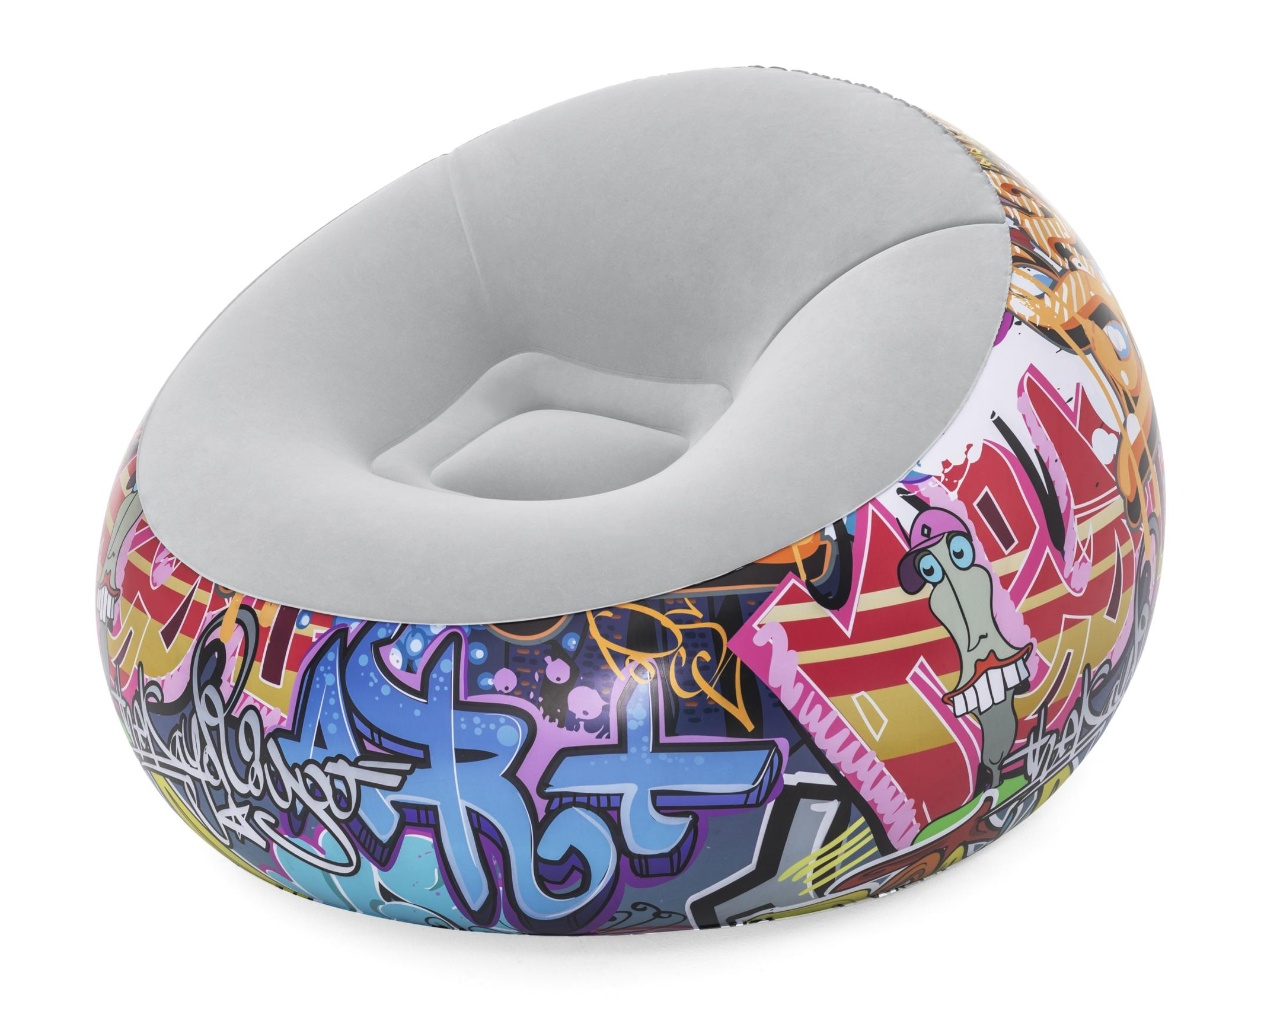 Fauteuil gonflable rond Bestway Graffiti Inflate-a-Chair 112x112x66cm